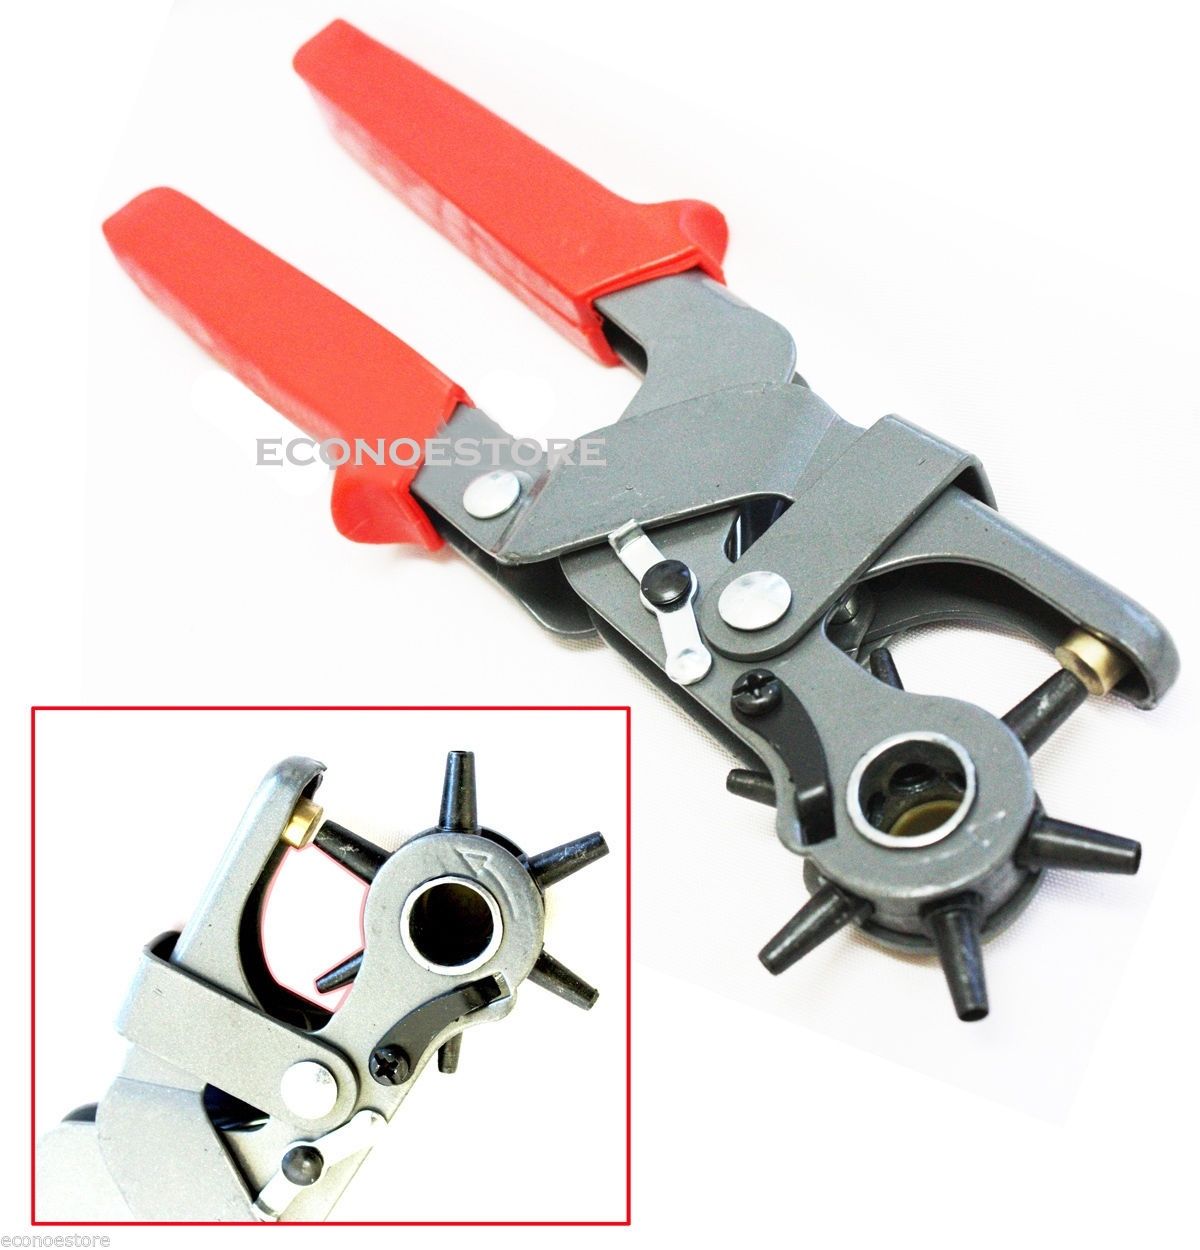 Heavy Duty Leather Hole Punch Hand Pliers Belt Holes 6 Sized Punches Tool